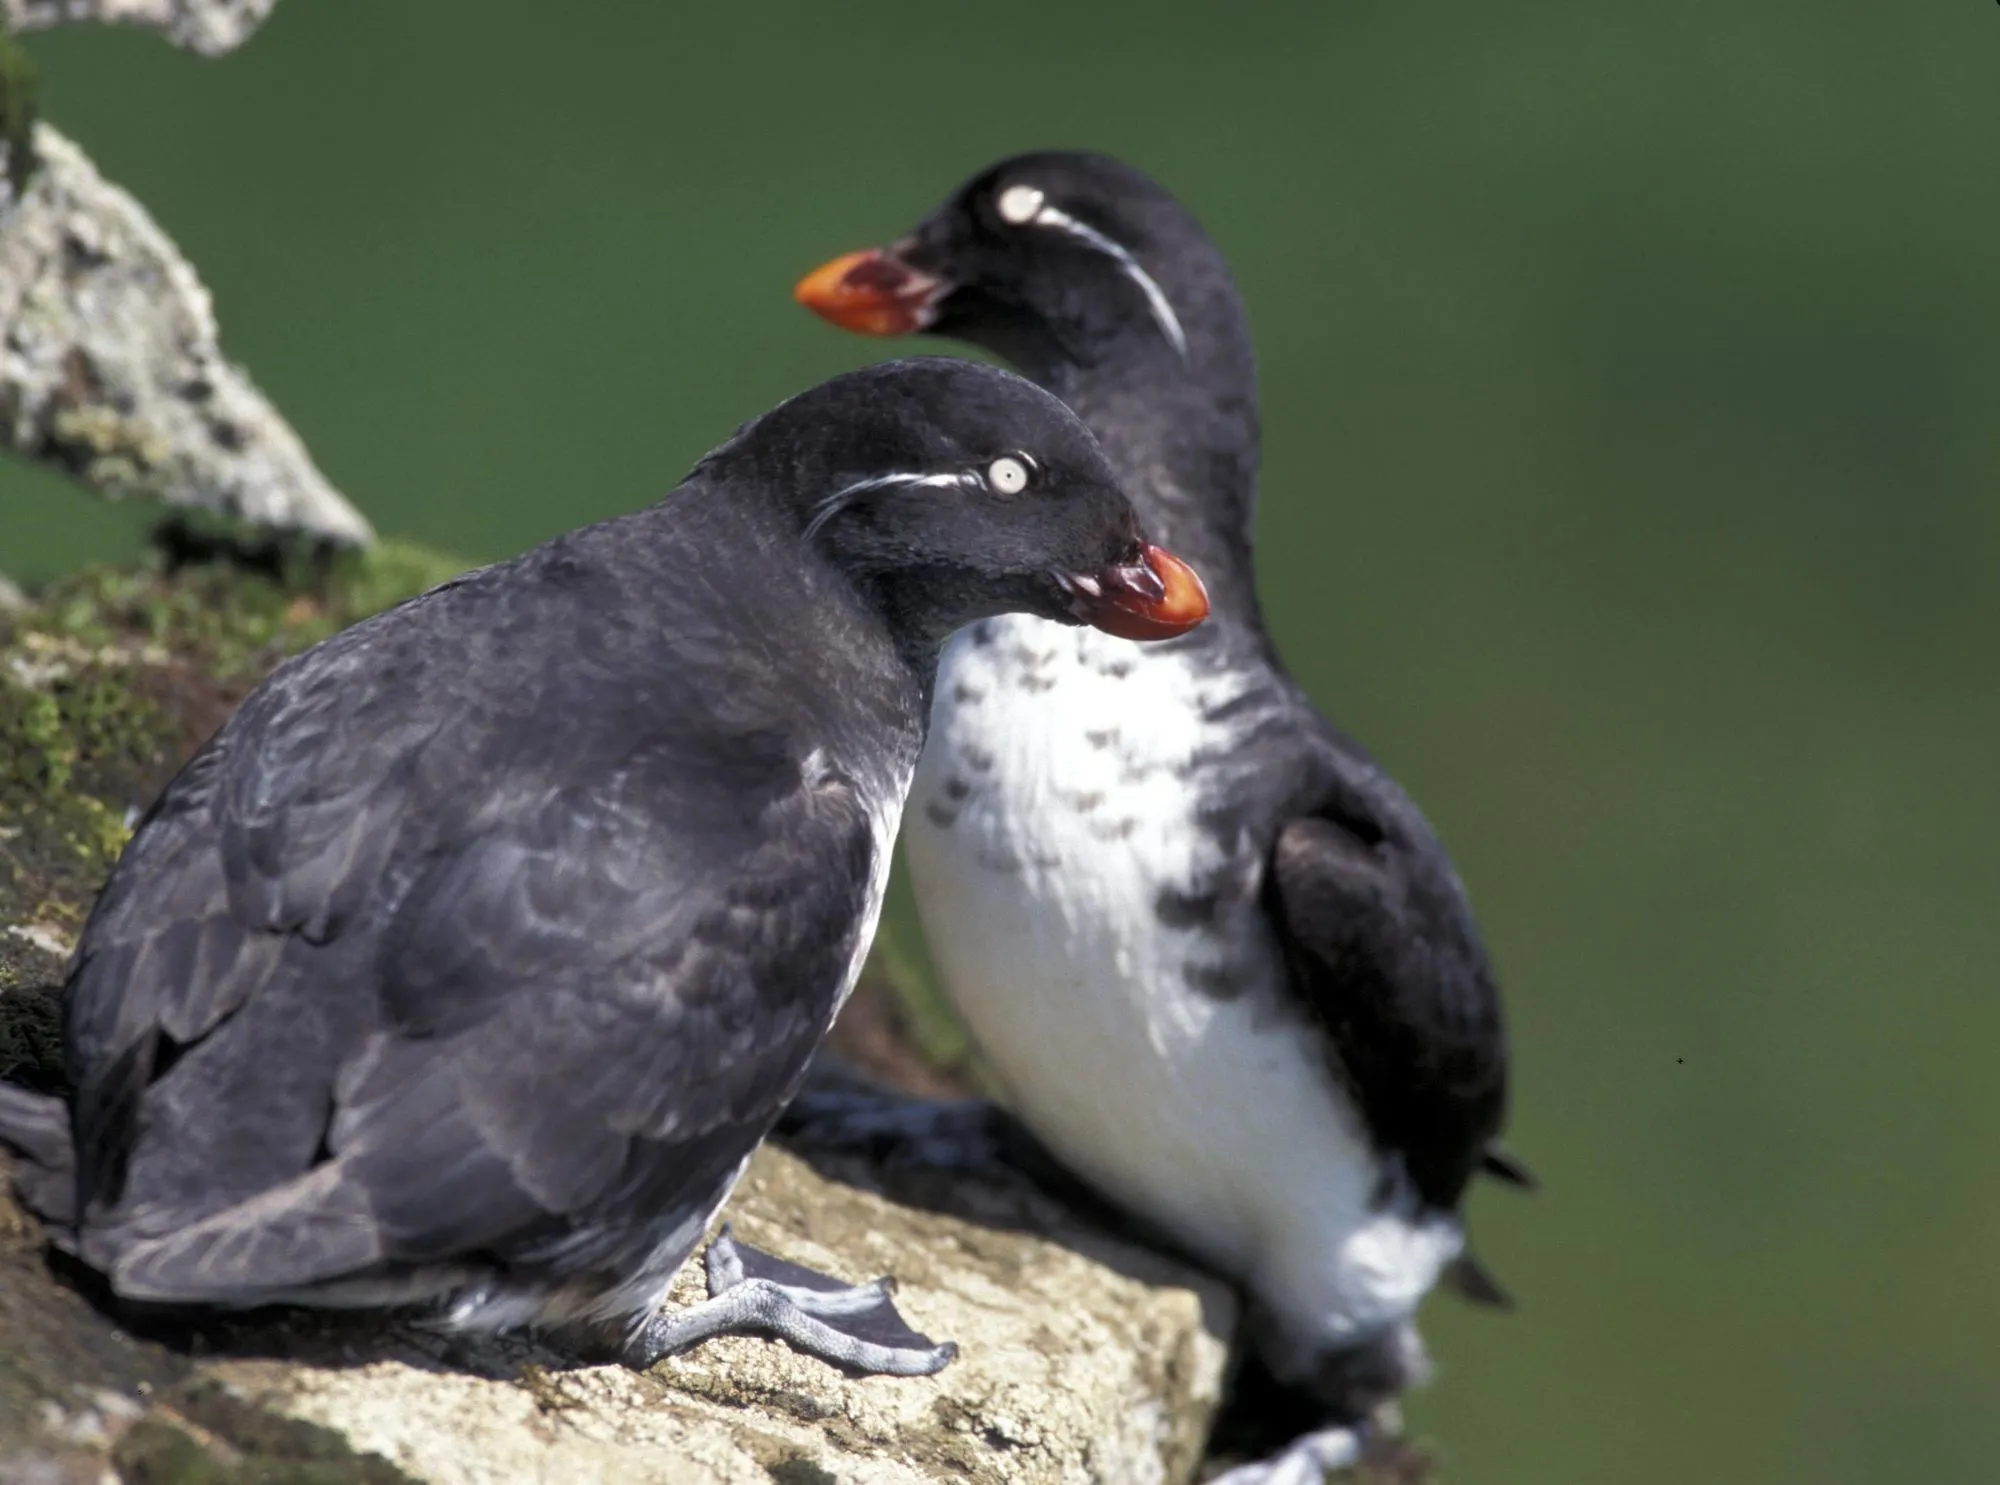 Auklet facts for kids are fascinating to read.